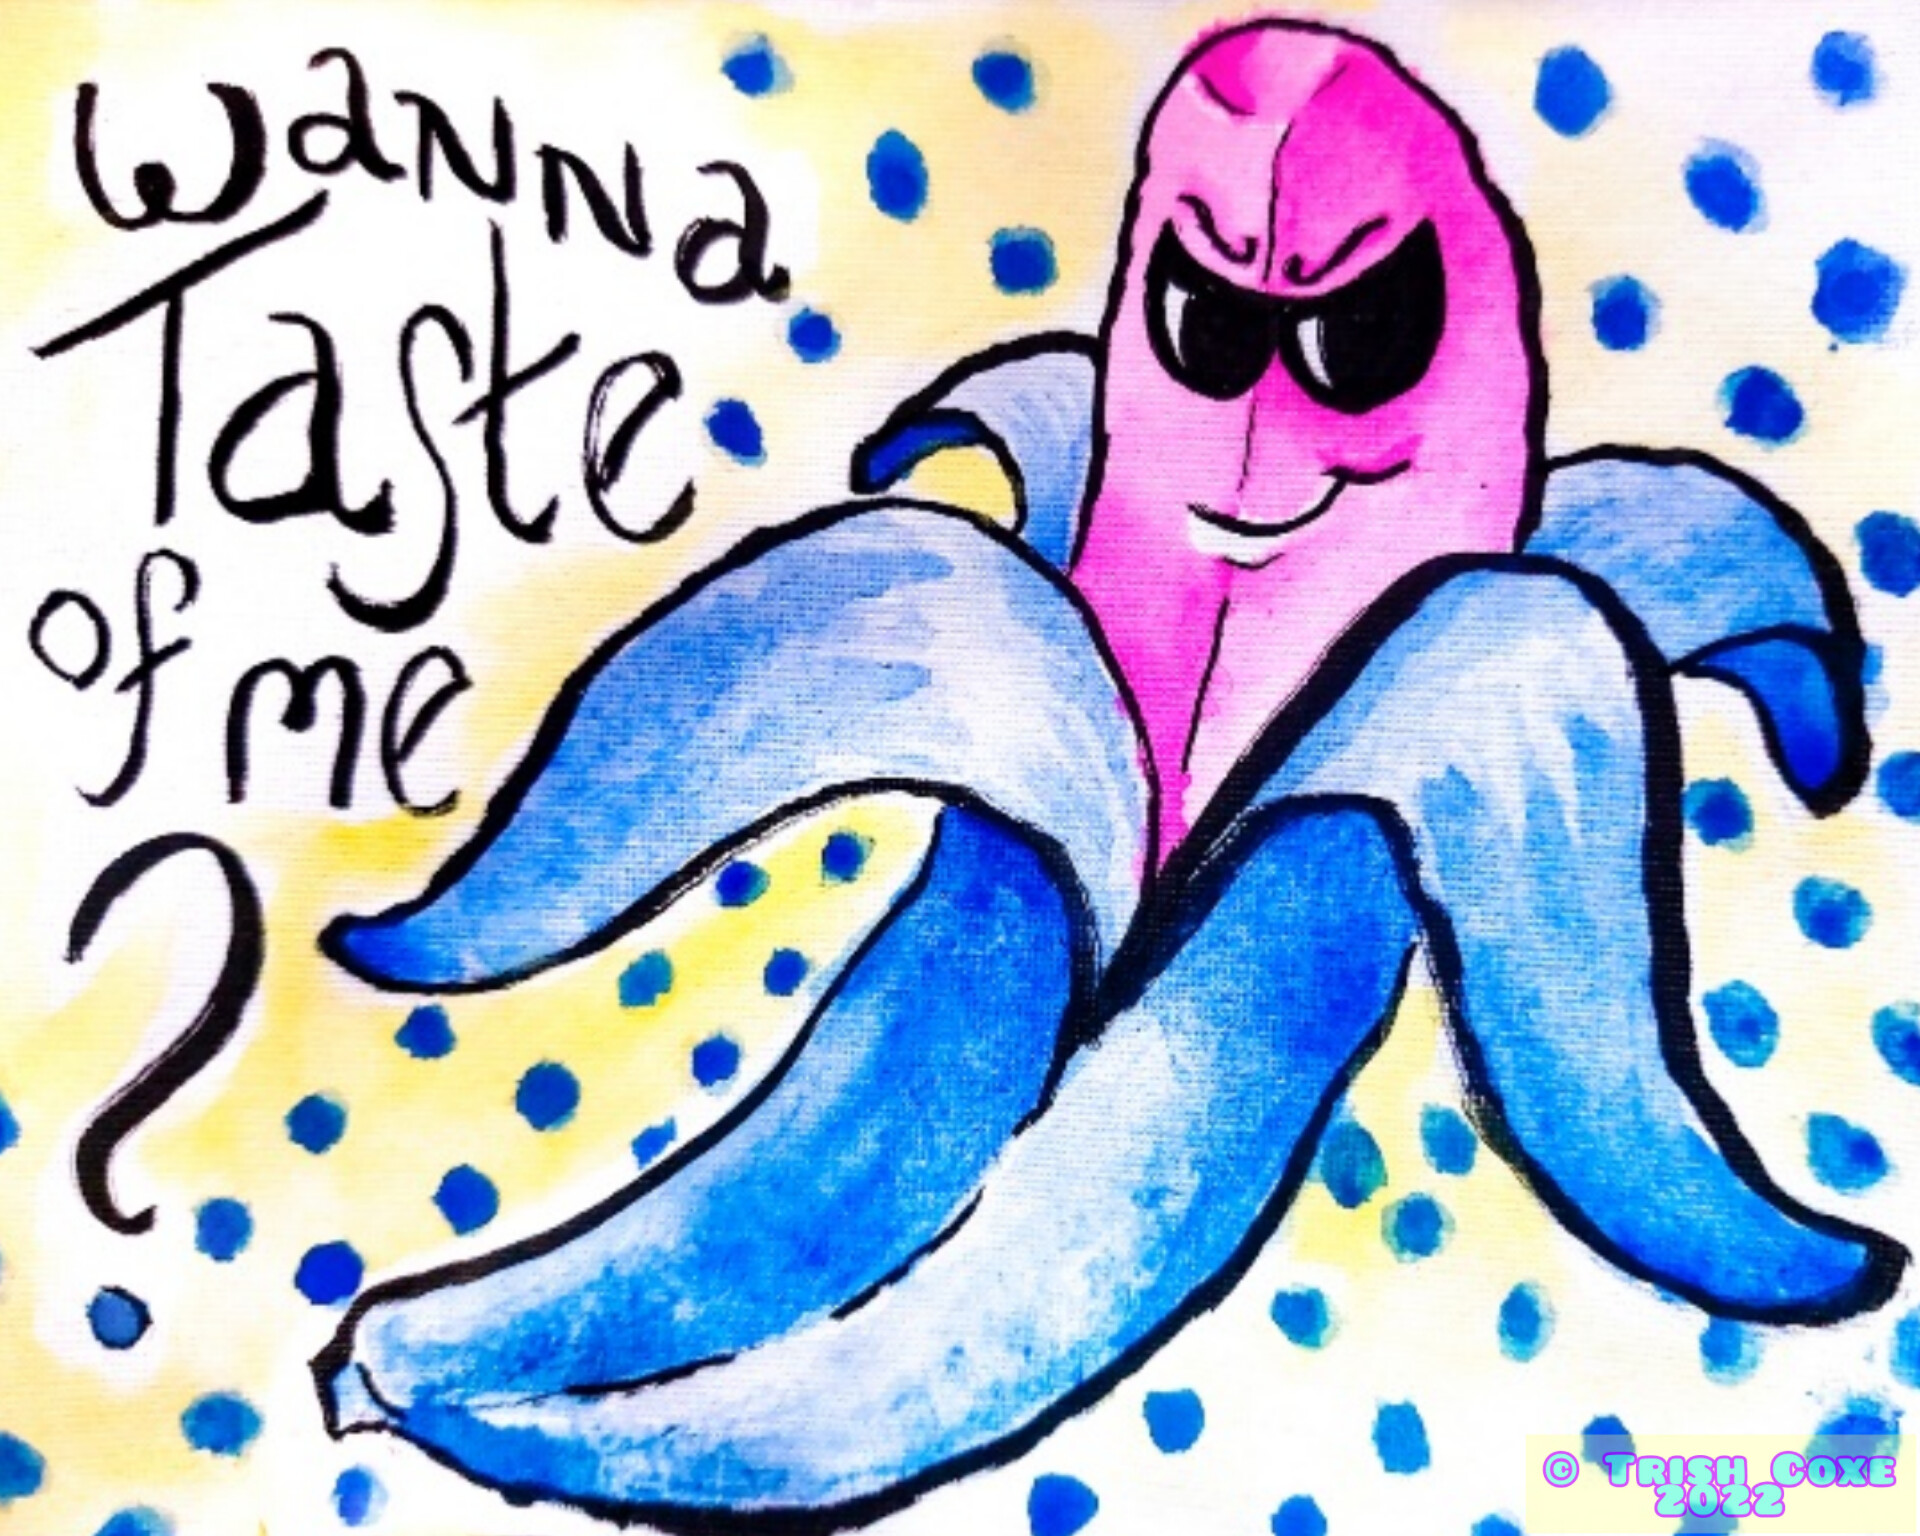 A magenta banana with blue peel and black shades with black ink outline and large hand-written text on left that reads 'Wanna taste of me?' over a yellow and blue polka-dot background